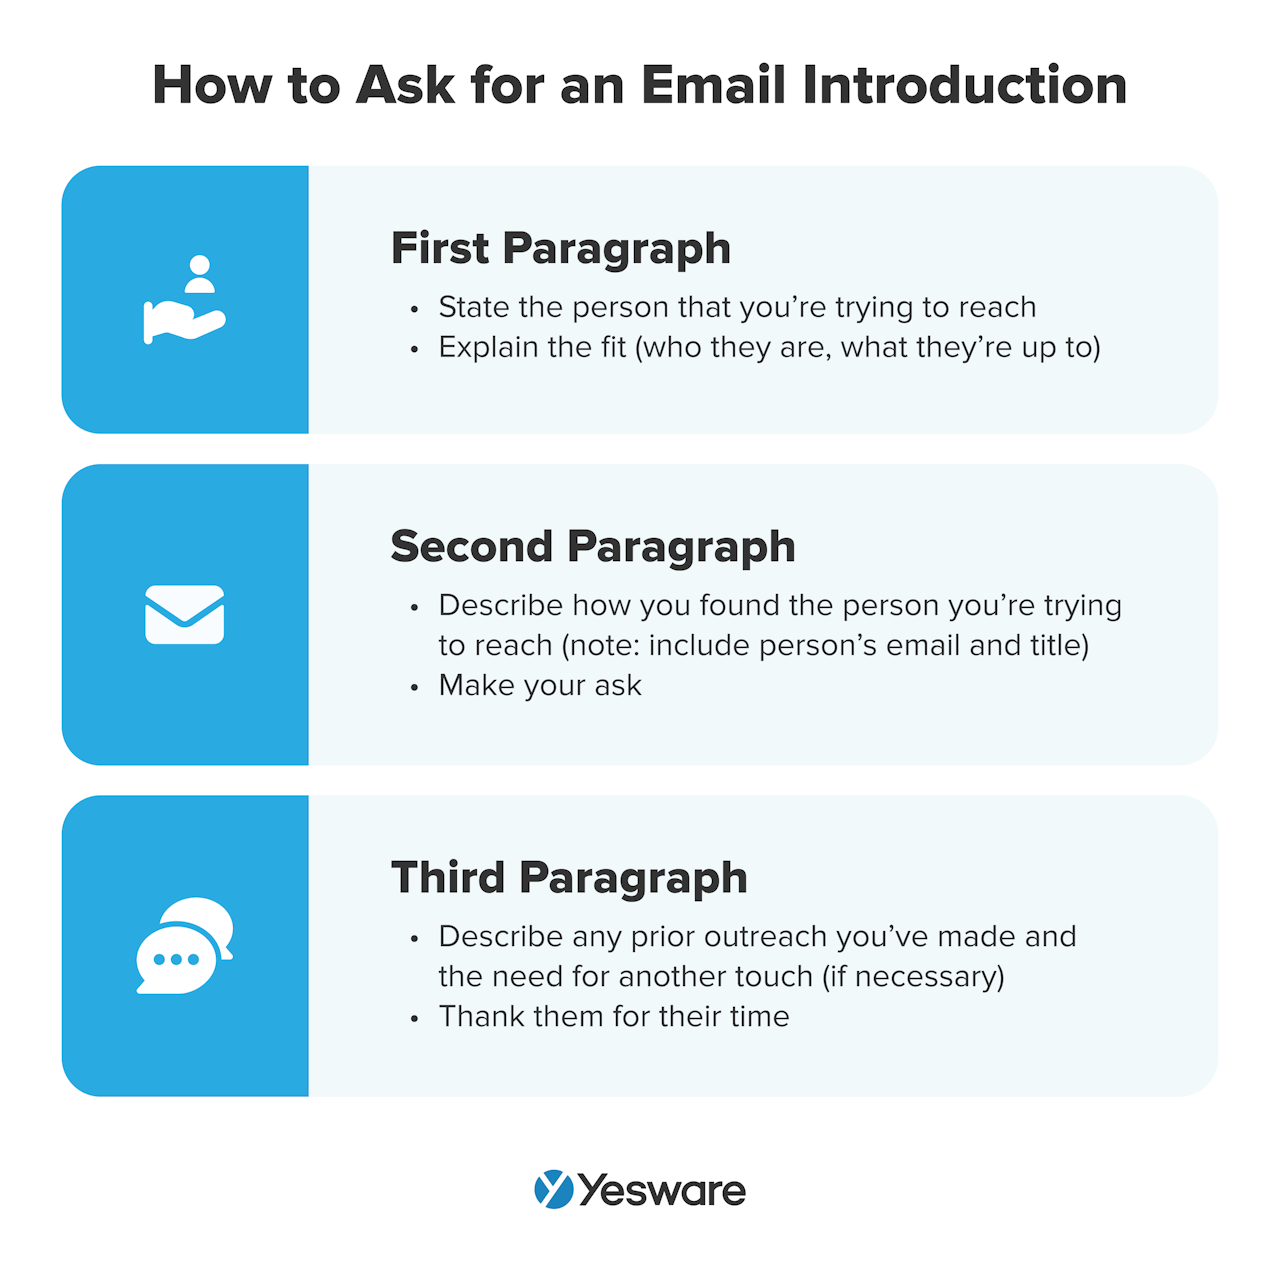 How to ask for an email introduction